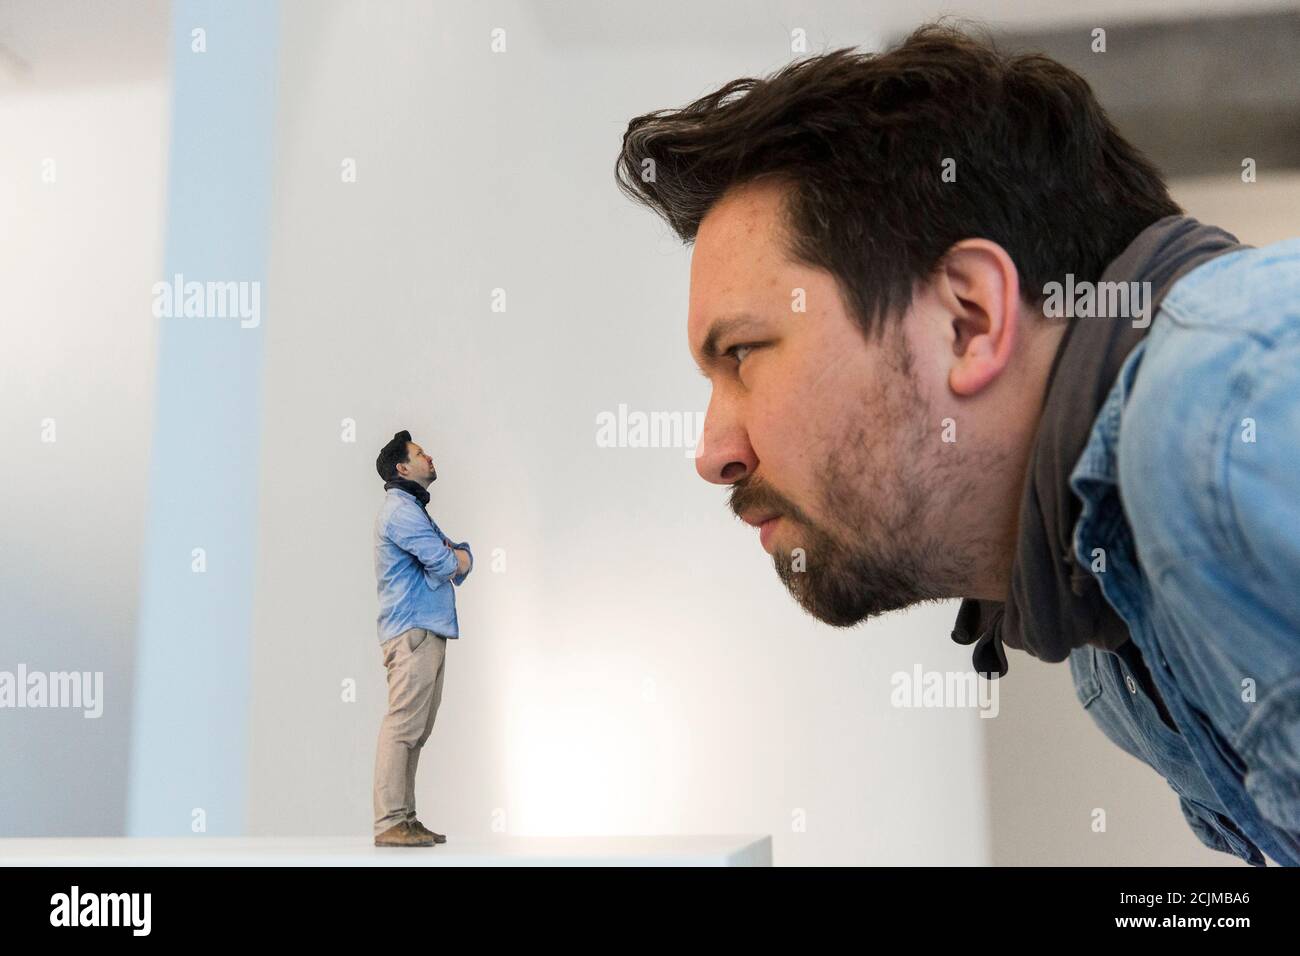 Twinkind co-founder Timo Schaedel looks at a 3D-printed figure of himself  at the Twinkind 3D printing studio in Berlin, December 13, 2013. A  3D-printed likeness is produced by taking a 360 degree